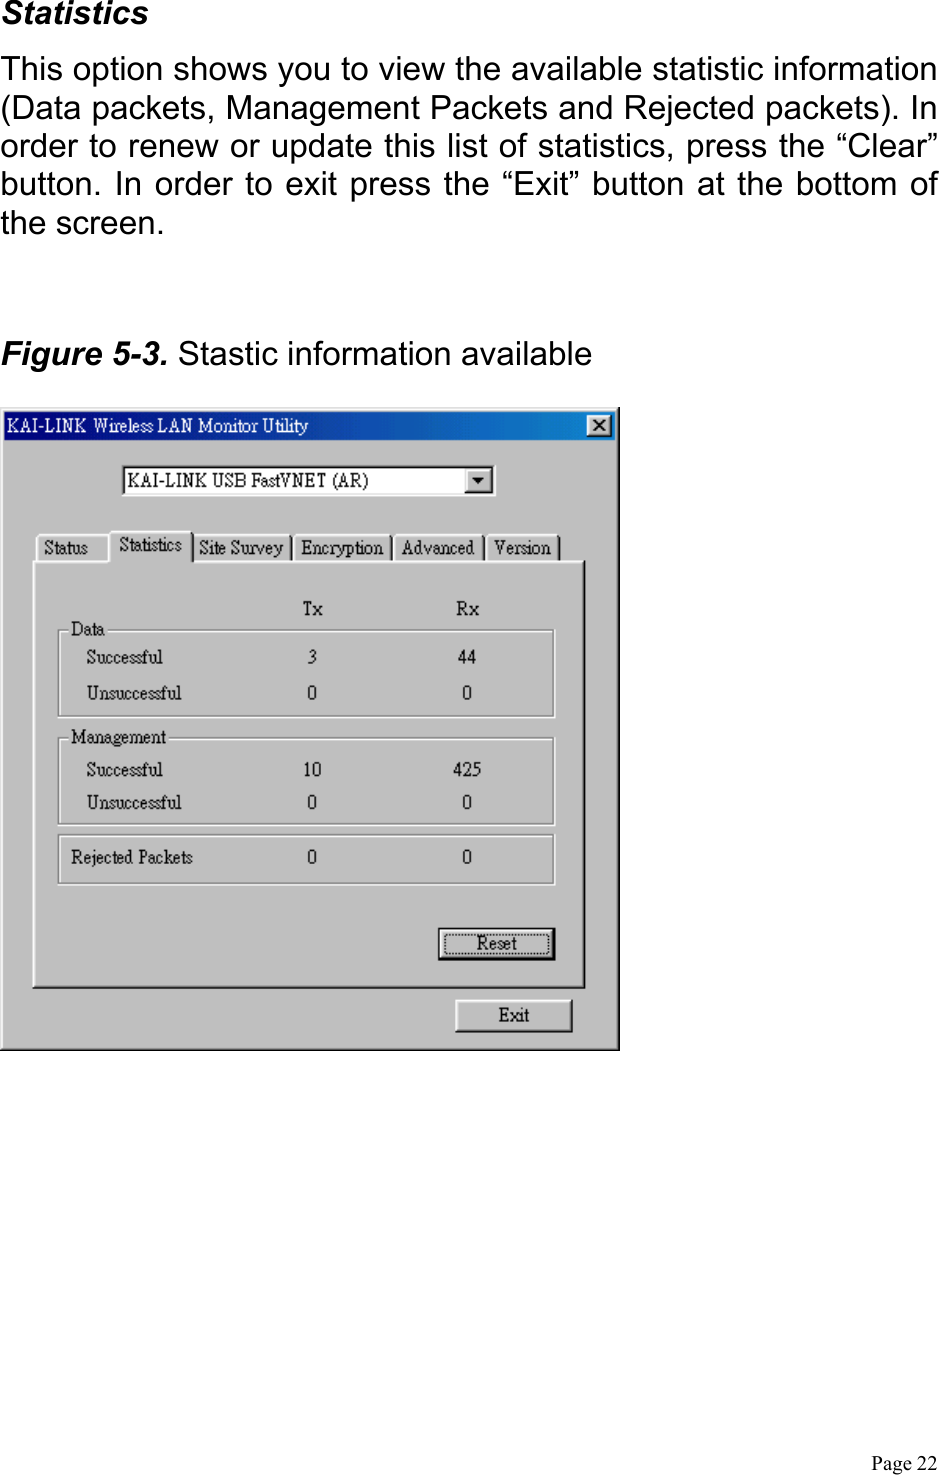  Page 22  Statistics This option shows you to view the available statistic information (Data packets, Management Packets and Rejected packets). In order to renew or update this list of statistics, press the “Clear” button. In order to exit press the “Exit” button at the bottom of the screen.  Figure 5-3. Stastic information available   